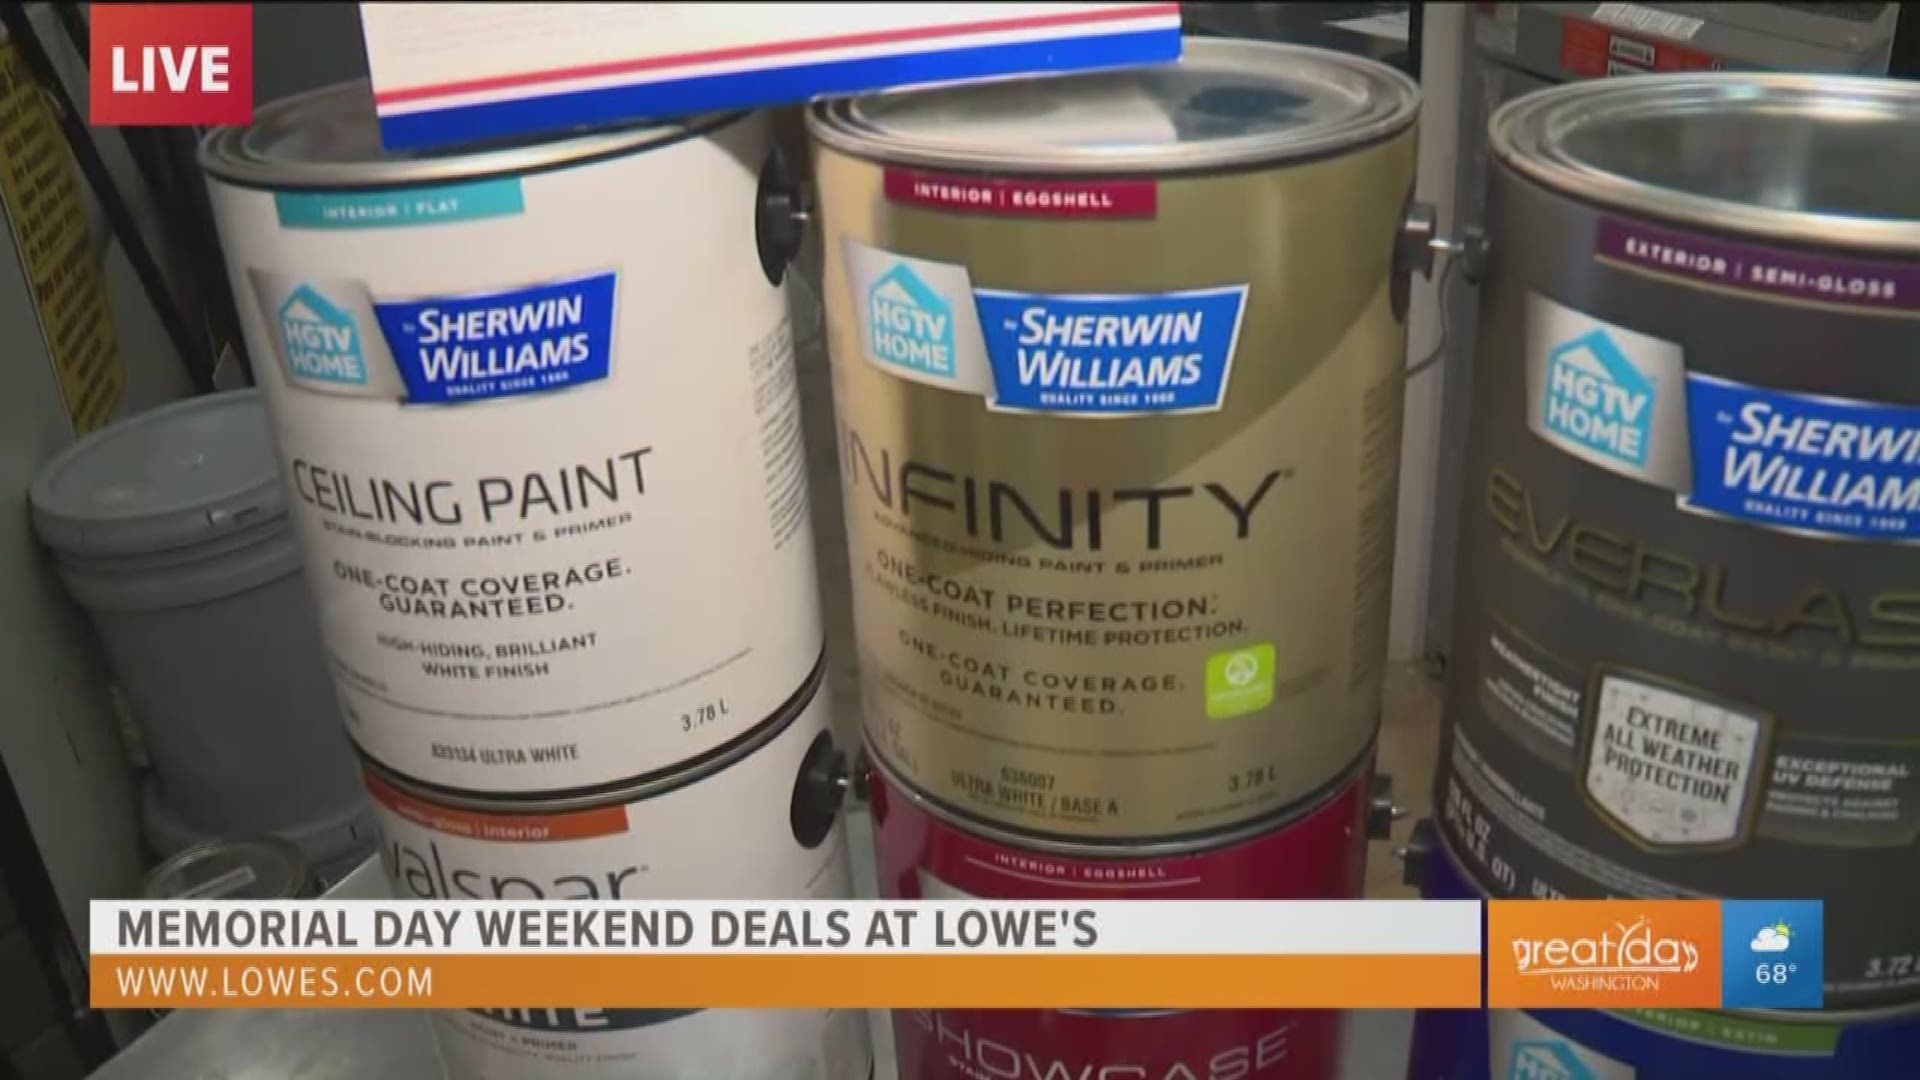 Lowe's is having a huge Memorial Day weekend sale from May 23rd - May 29th. Get great deals on paint to brighten up your home, in store or at Lowes.com.